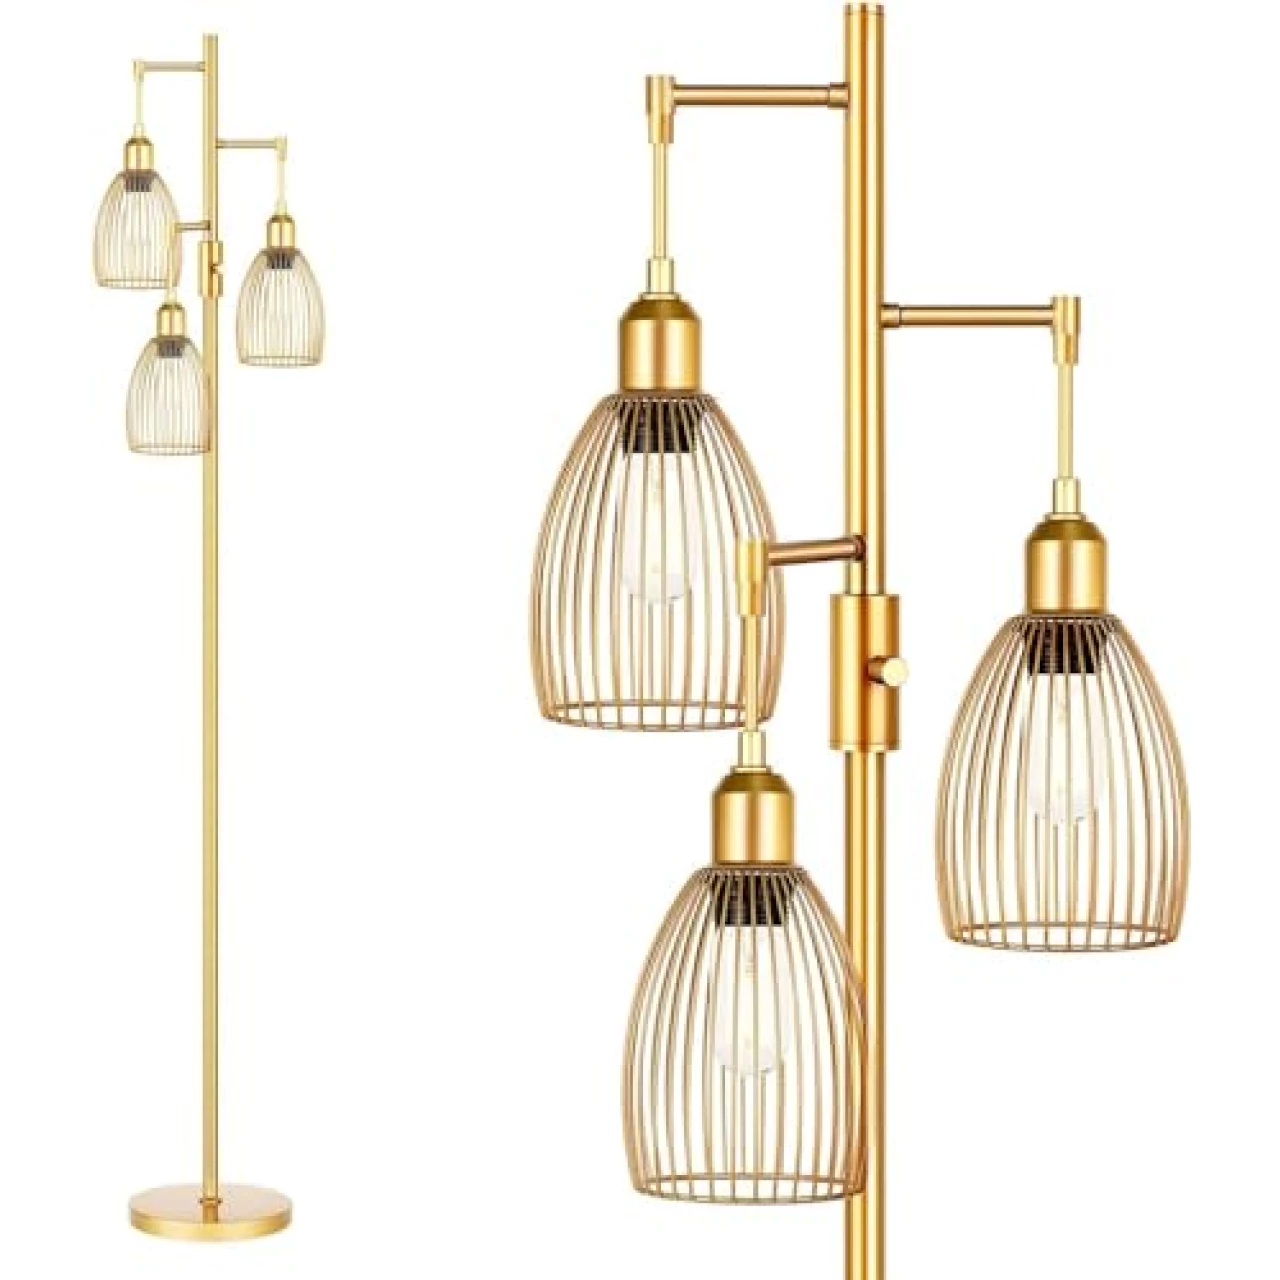 Dimmable Industrial Floor Lamps for Living Room, Gold Tree Standing Tall Lamps with 3 Elegant Teardrop Cage Head &amp; 800 Lumens LED Bulbs for Bedroom Office